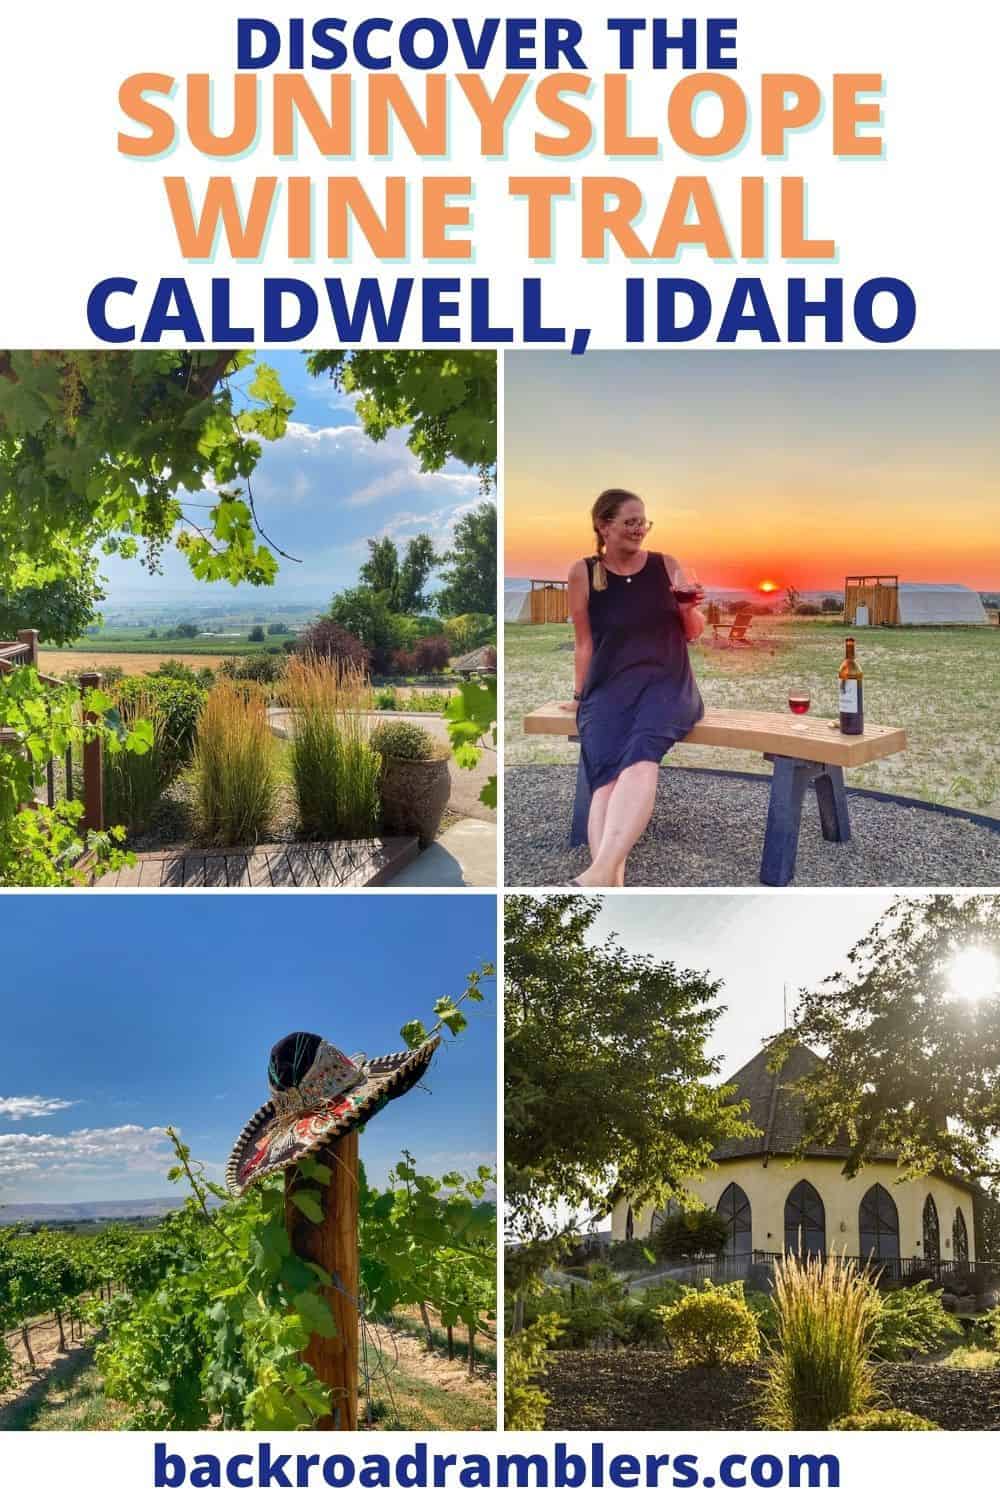 A collage of photos featuring wineries in Caldwell Idaho. Text overlay: Discover the Sunnyslope Wine Trail in Caldwell, Idaho.